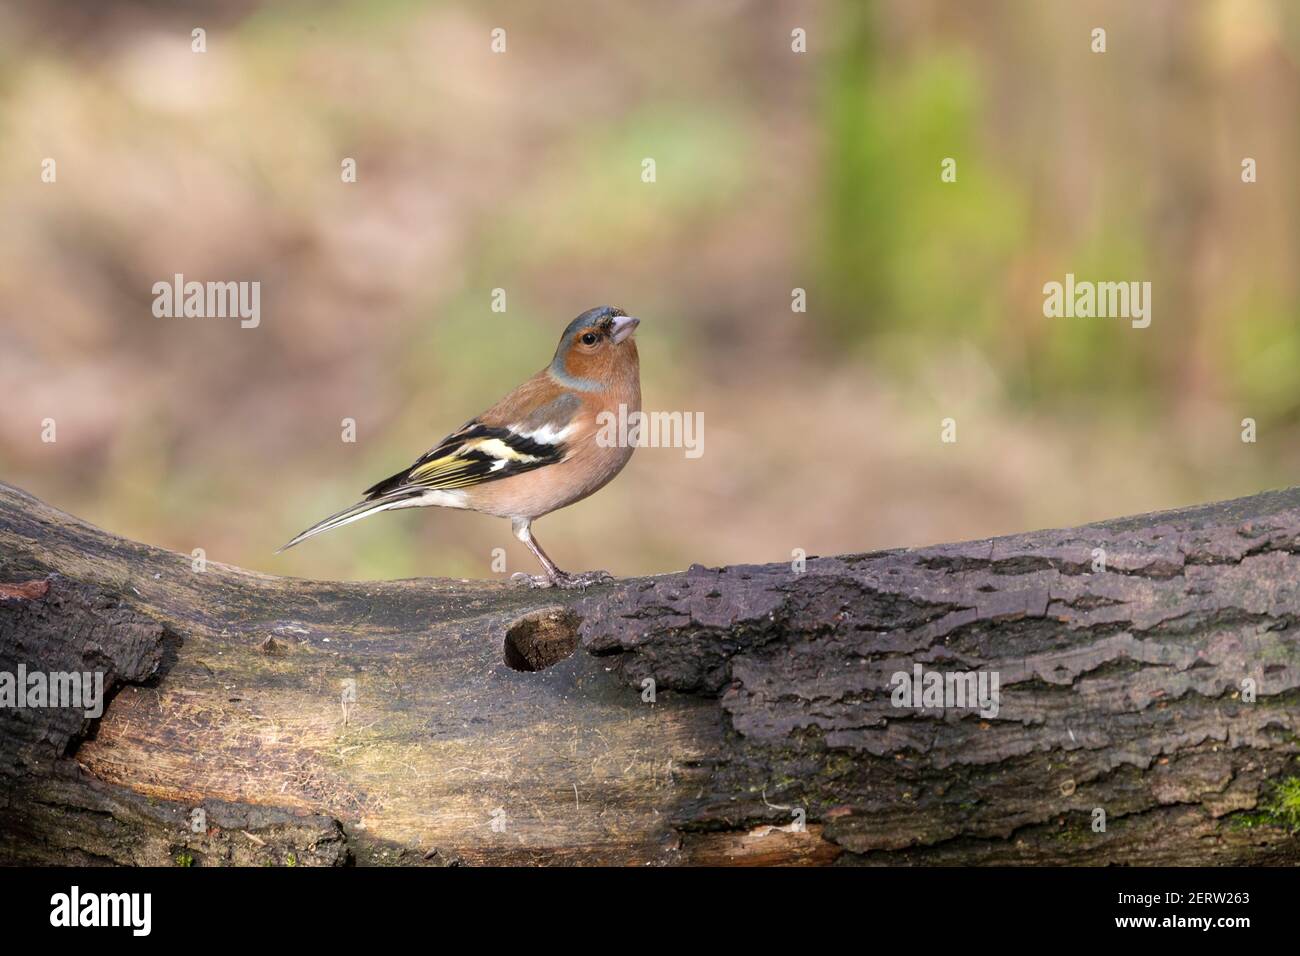 Common Chaffinch male Fringilla coelebs on a bowed tree trunk with plumage lit by late winter sun in West Yorkshire U.K. Stock Photo